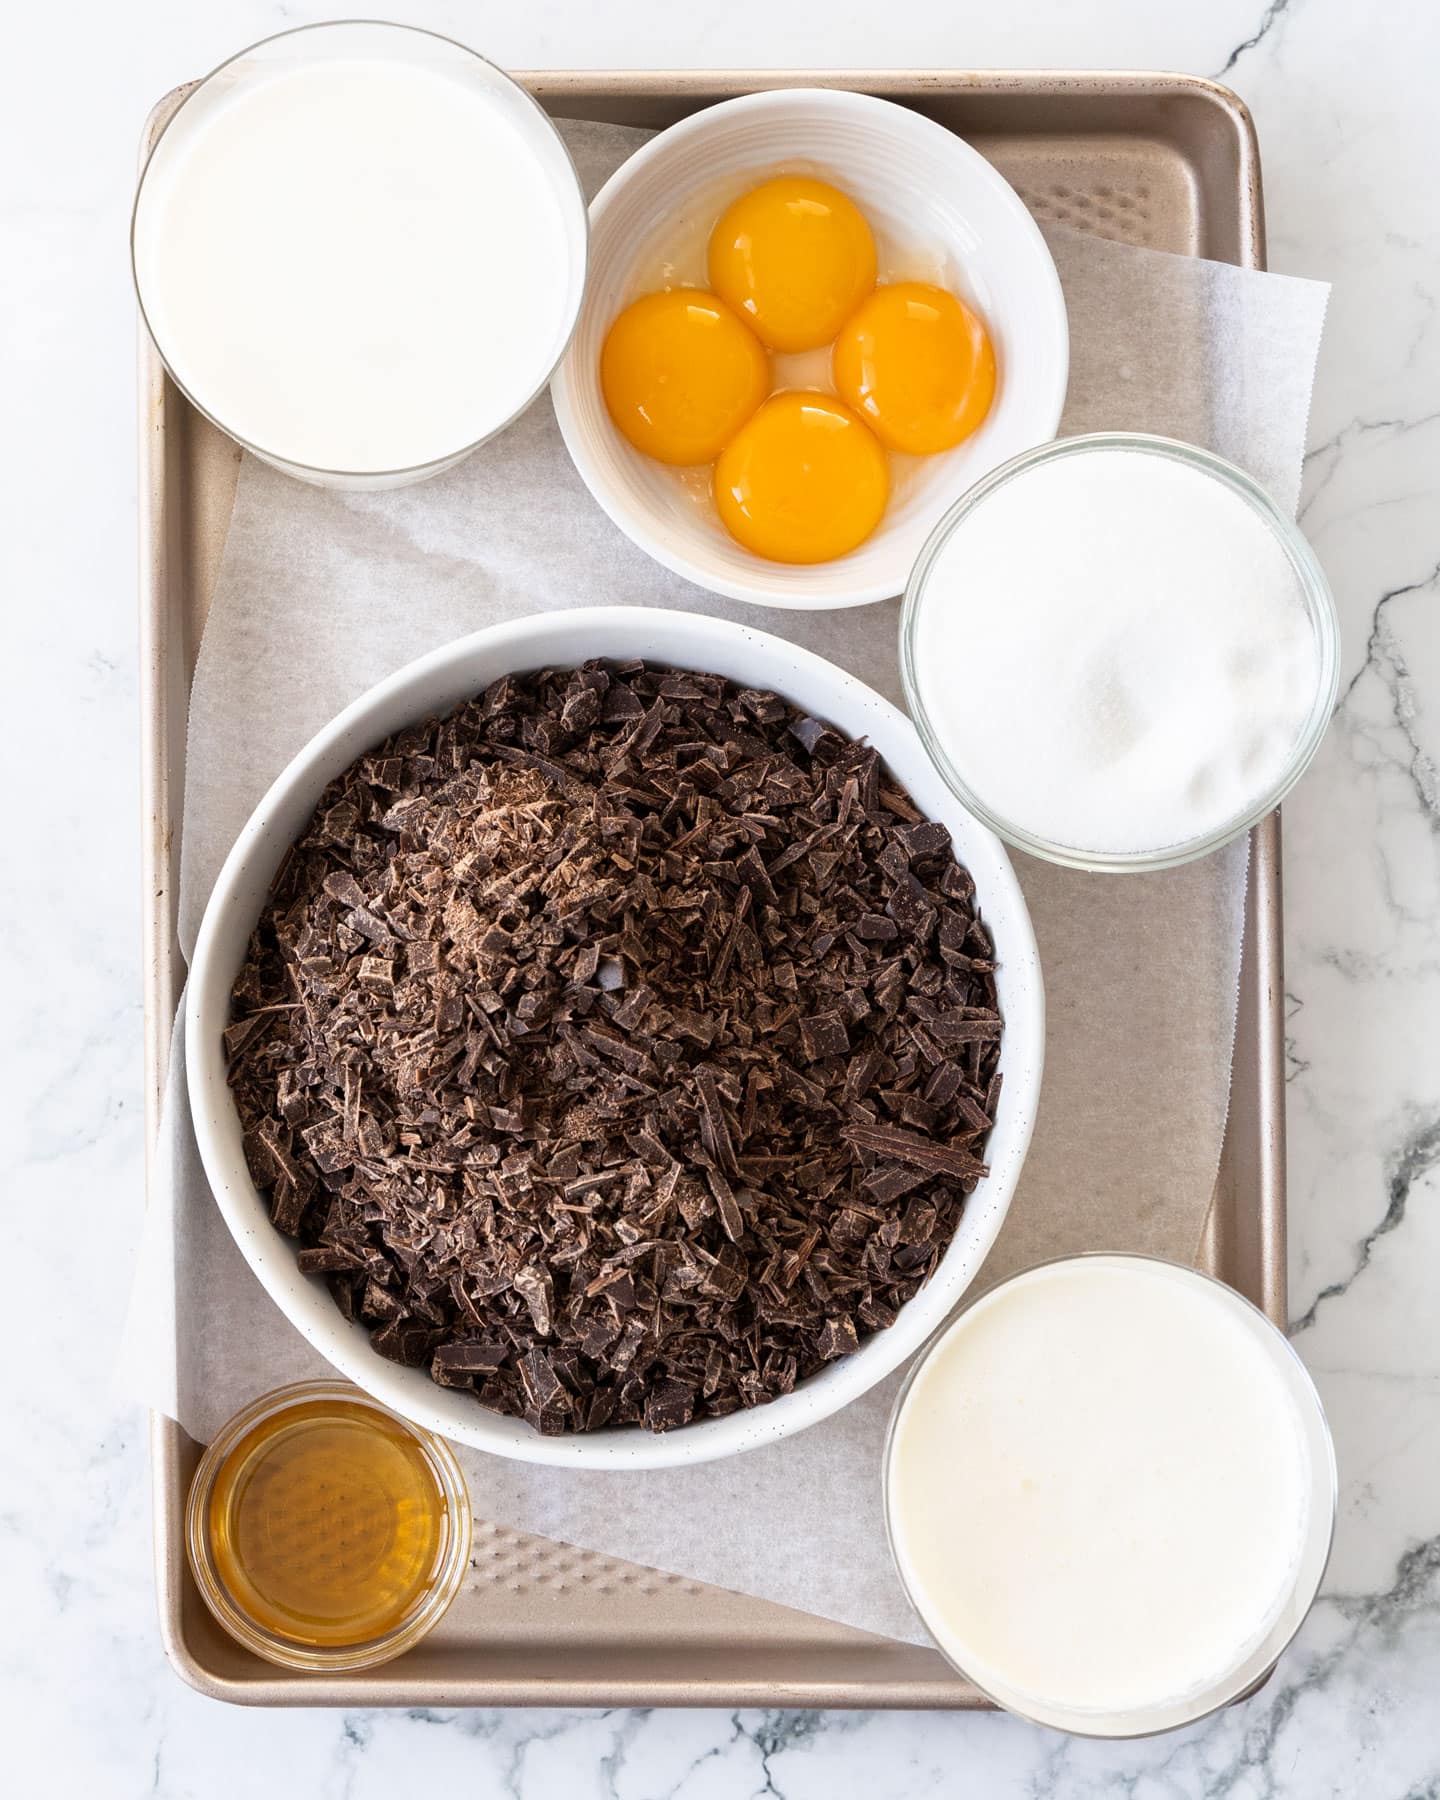 Ingredients for chocolate cremeux on a baking tray.